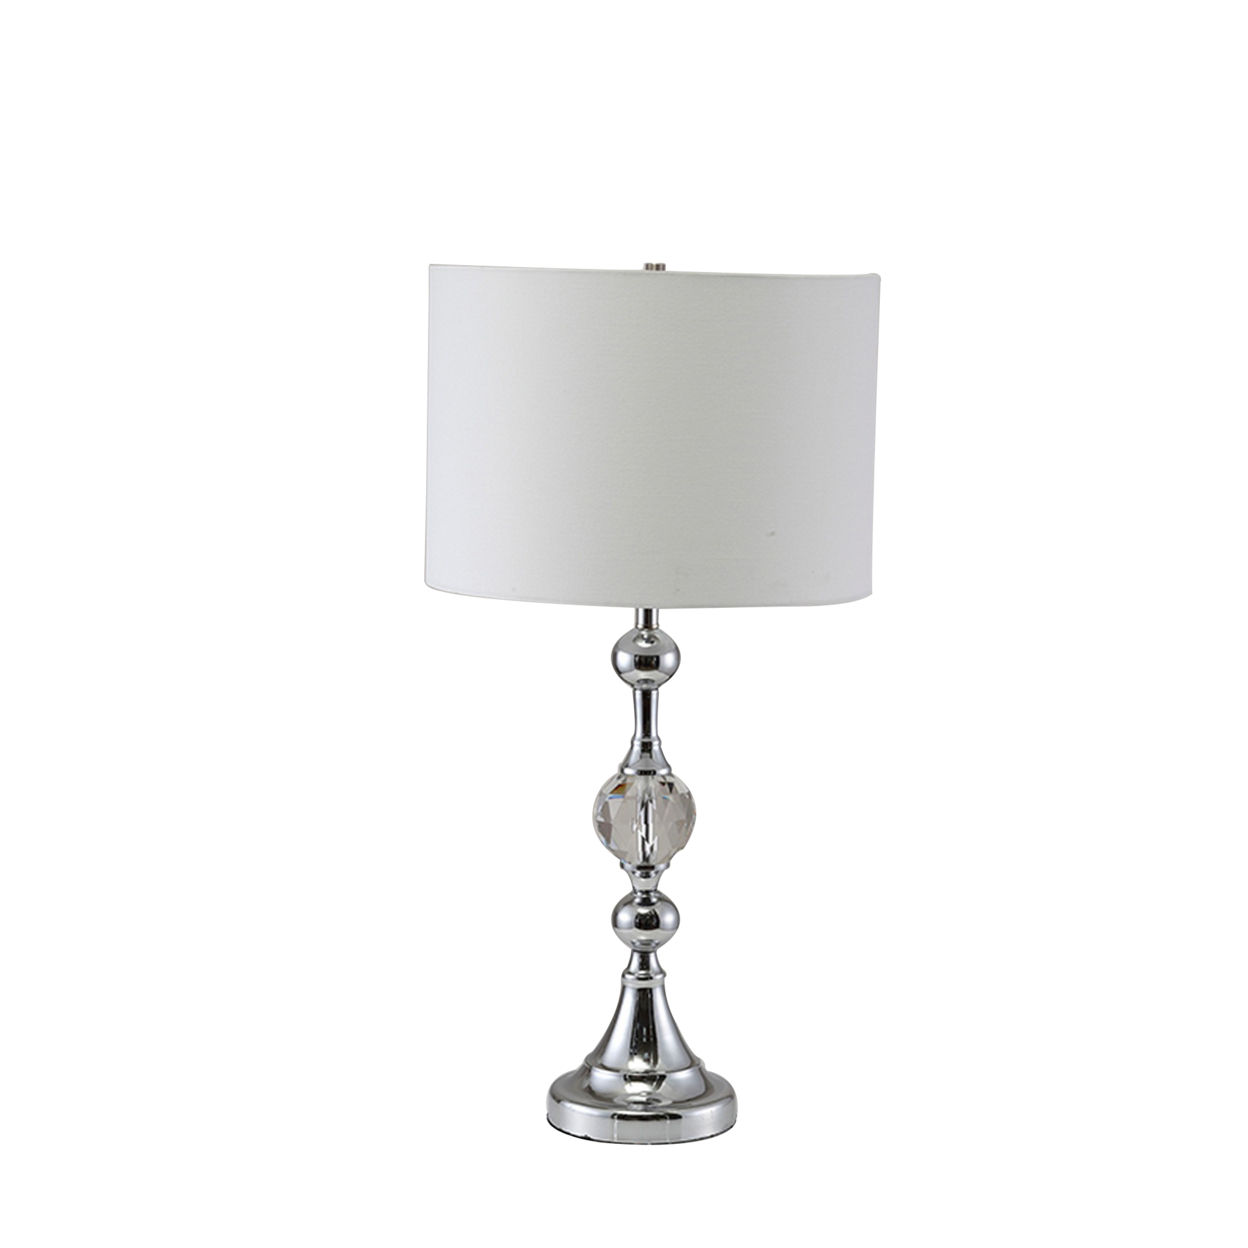 Table Lamp With Metal And Crystal Accents, Silver And White- Saltoro Sherpi